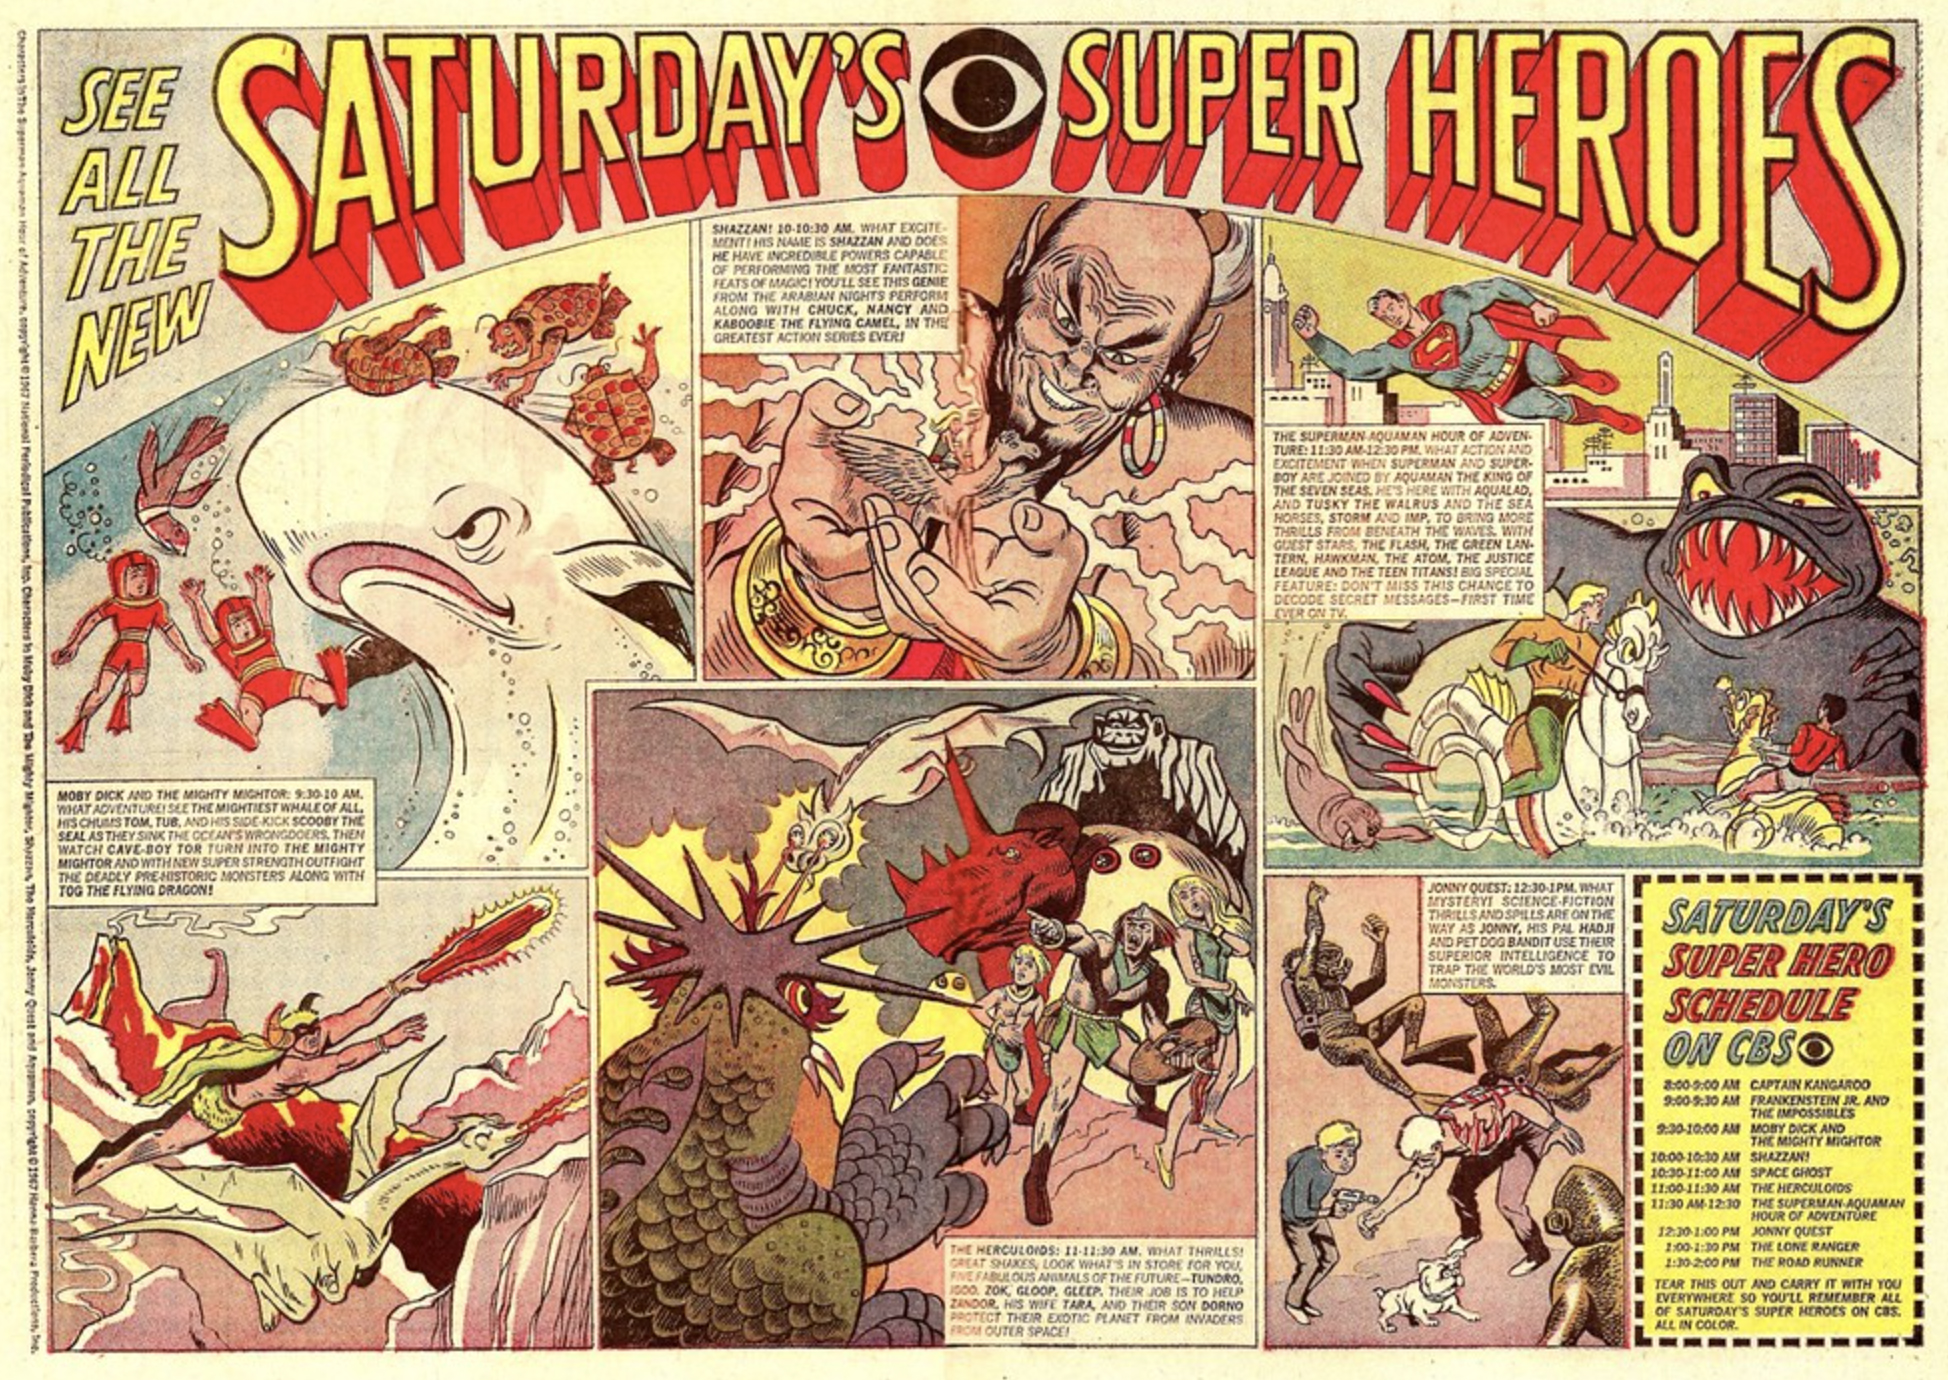 Adam Talking Superman on X: Alex Toth Superman art. Some for Super Friends  some for Underoos  / X